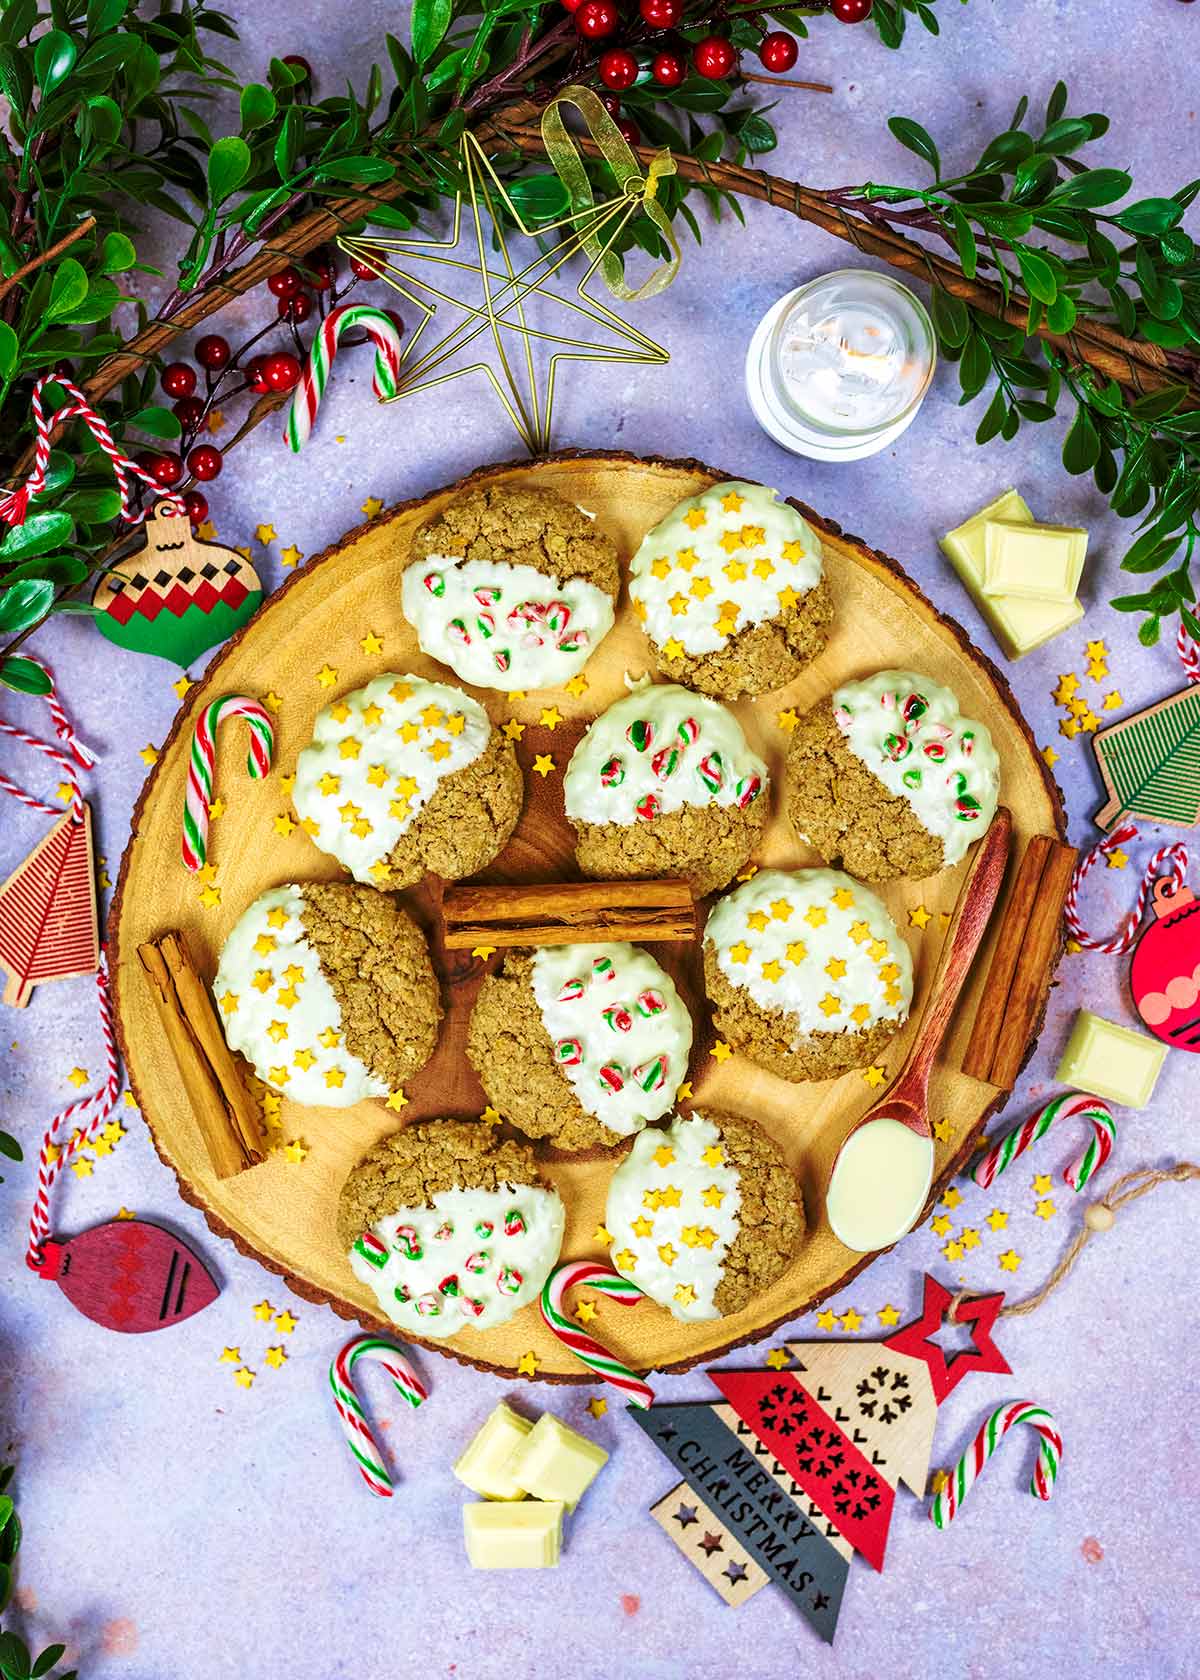 Ten decorated cookies on a round wooden board surrounded by Christmas decorations.